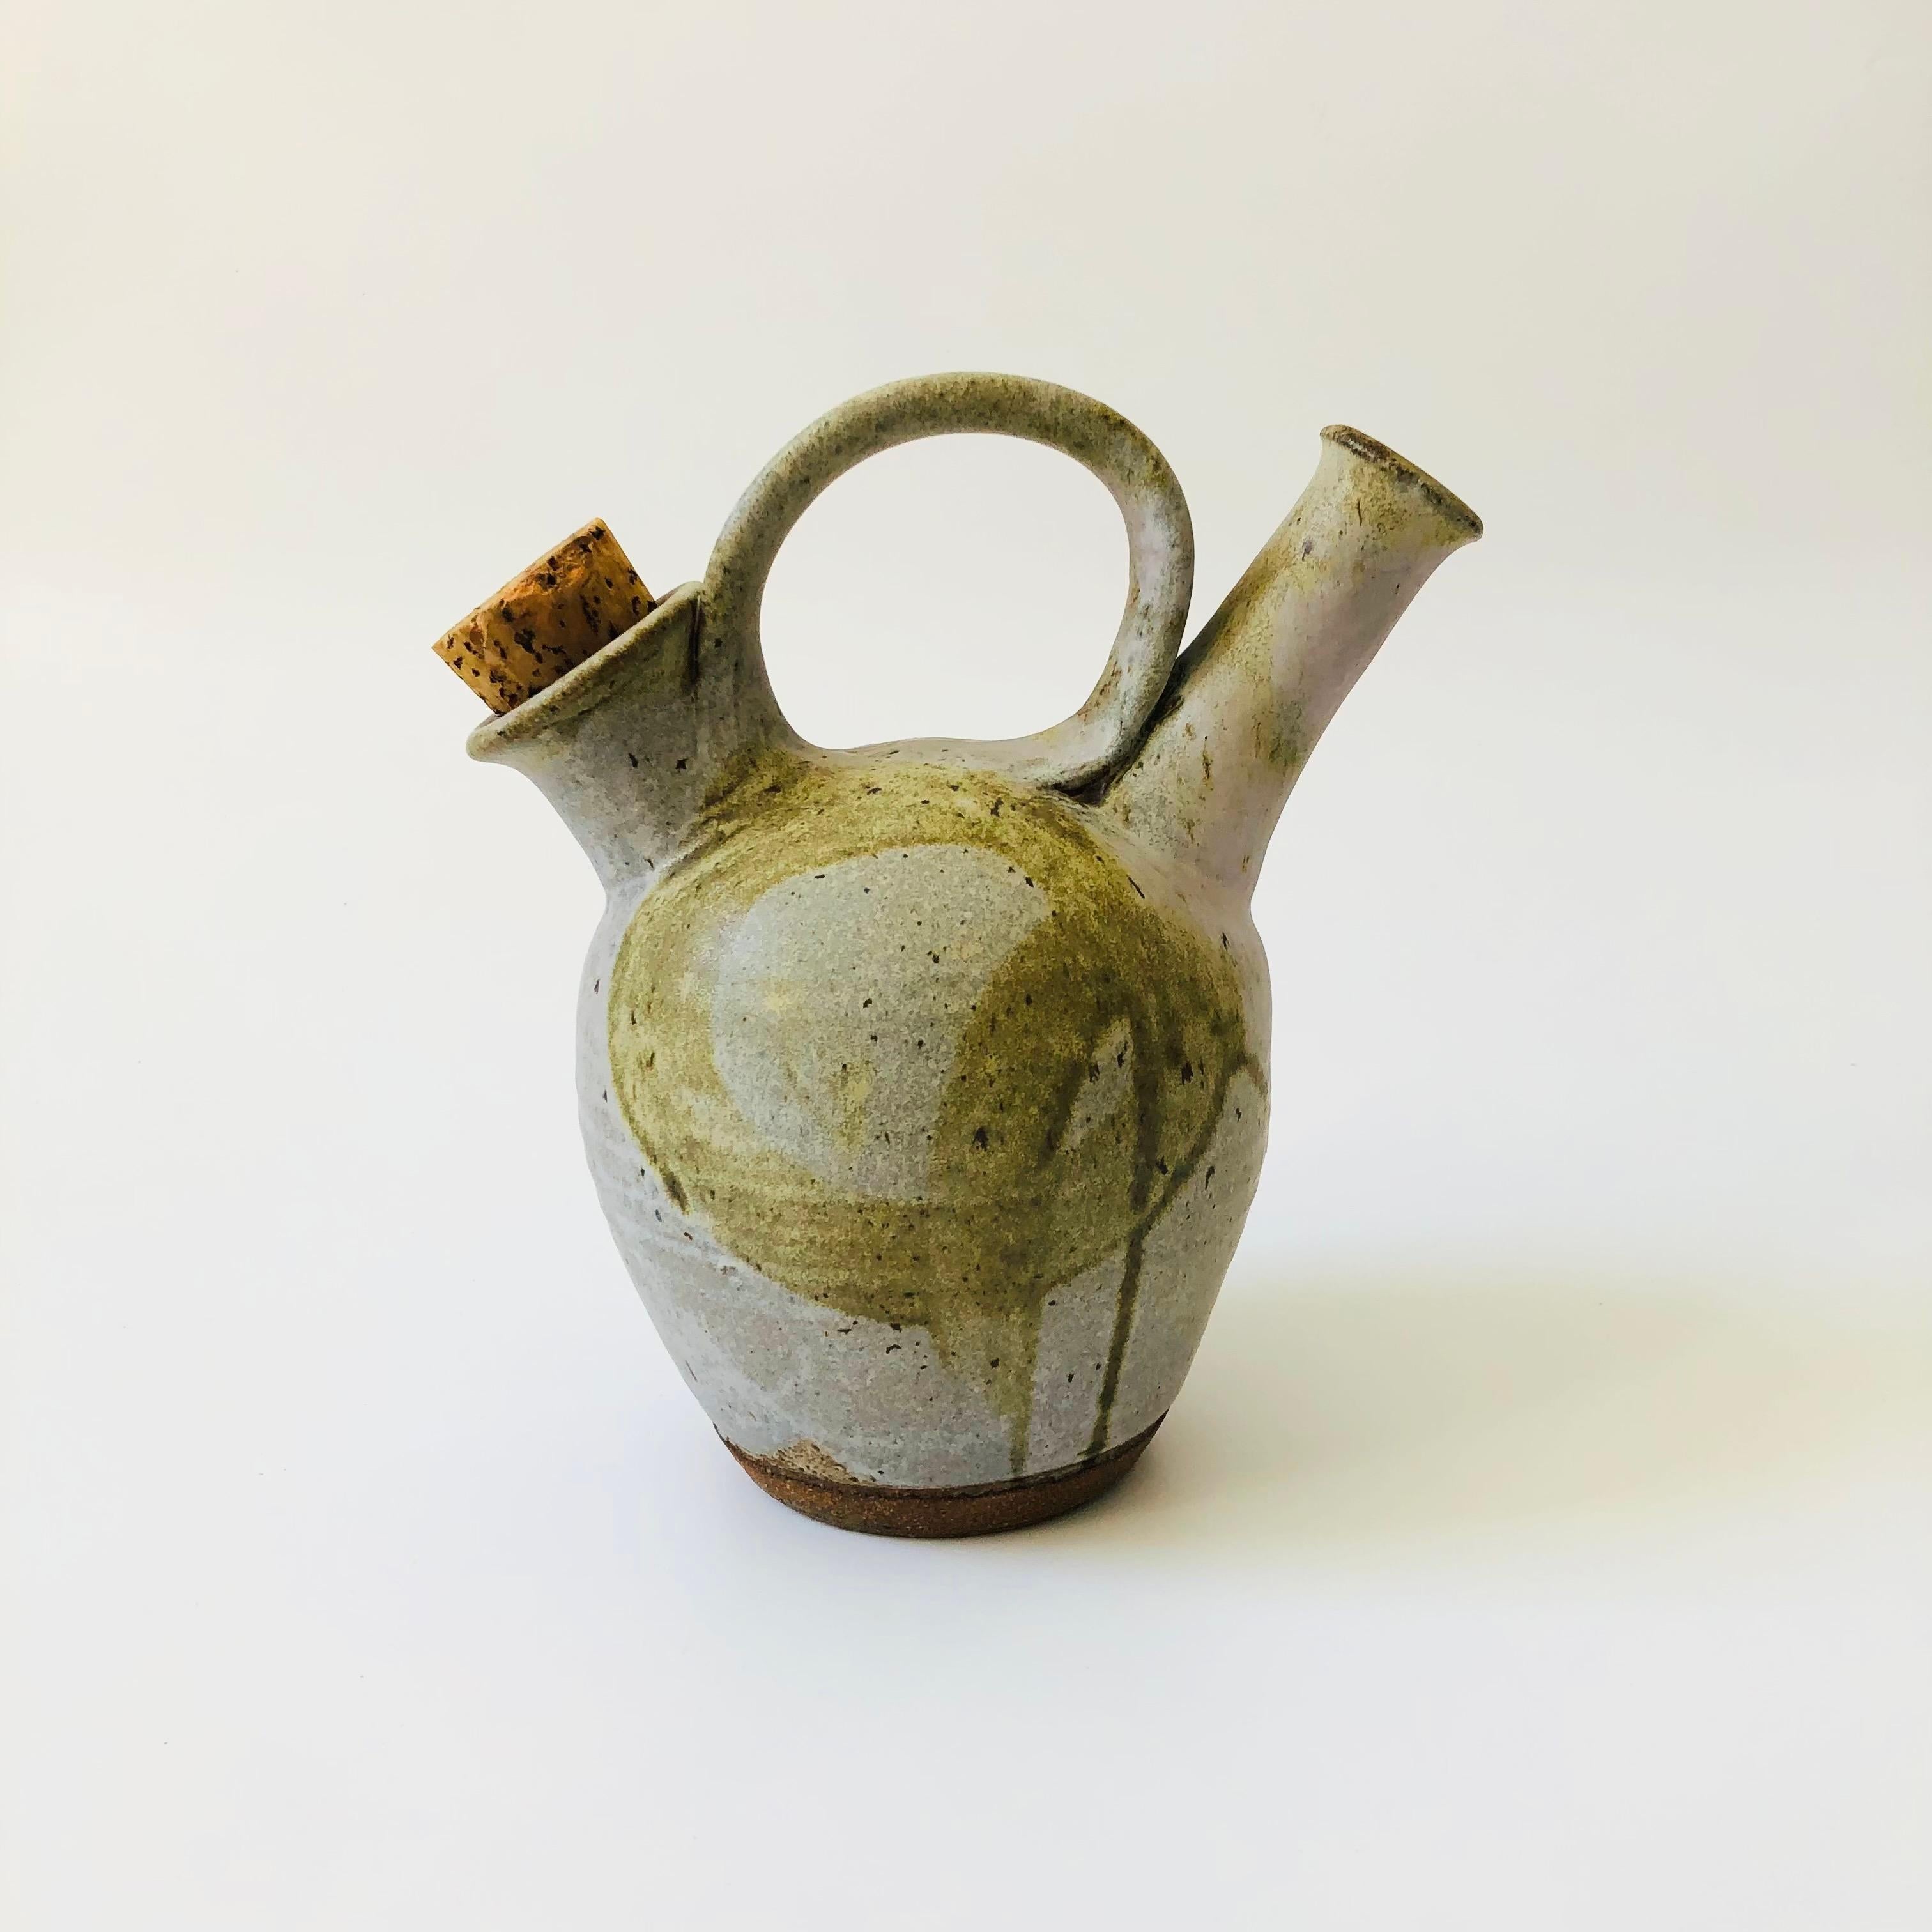 A vintage studio pottery pitcher. Lovely speckled gray glaze with a freeform hand painted design in the center. Features a center handle with a spout on one side and a corked opening for refilling on the other side. Maker is unknown, signed 